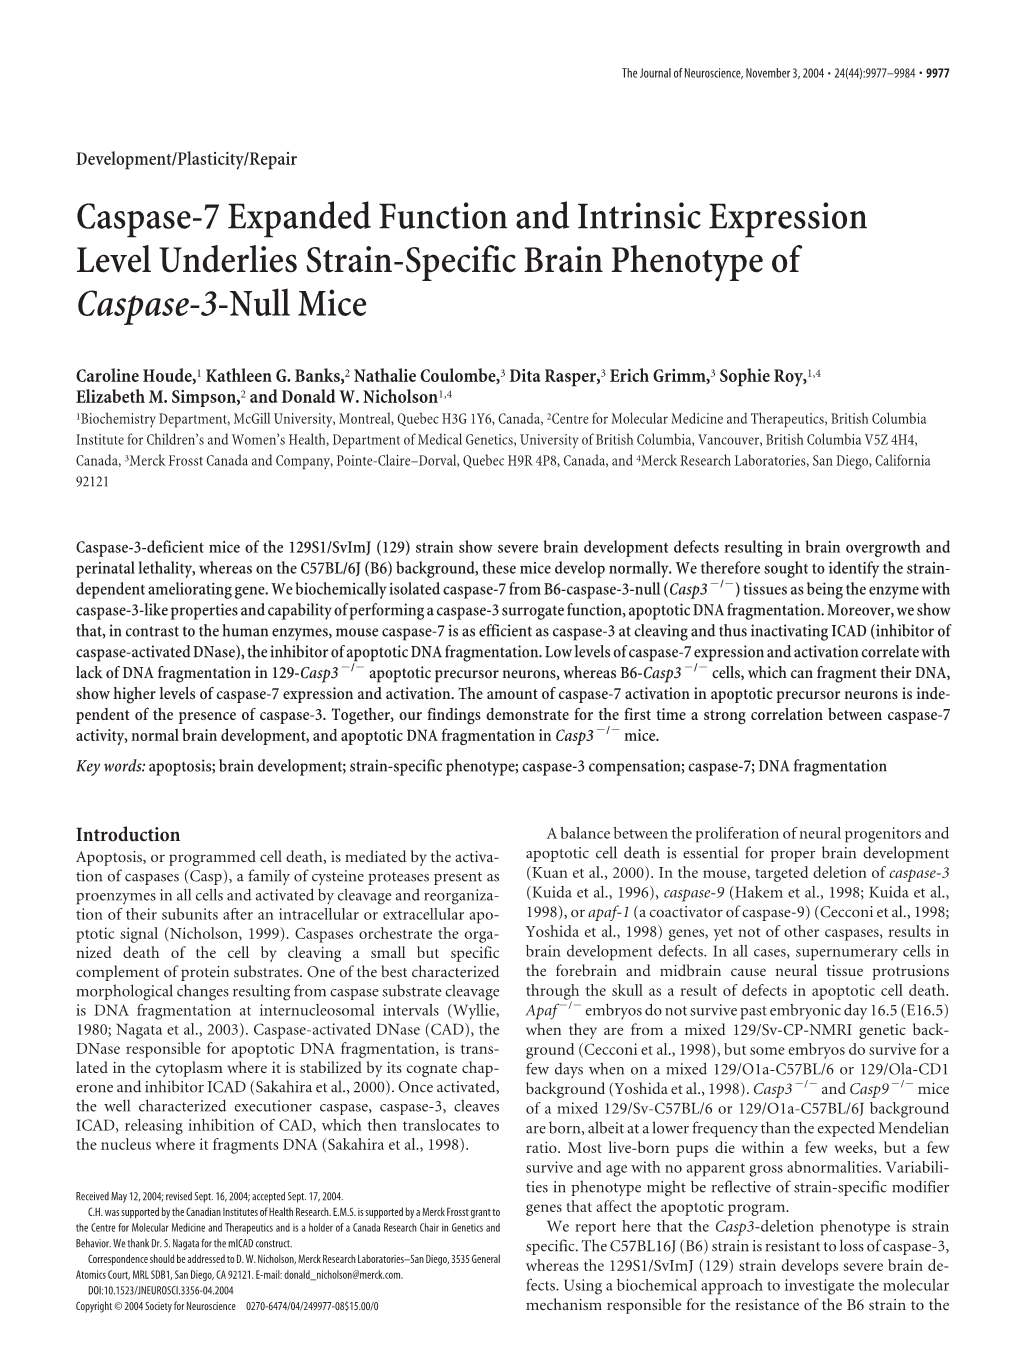 Caspase-7 Expanded Function and Intrinsic Expression Level Underlies Strain-Specific Brain Phenotype of Caspase-3-Null Mice